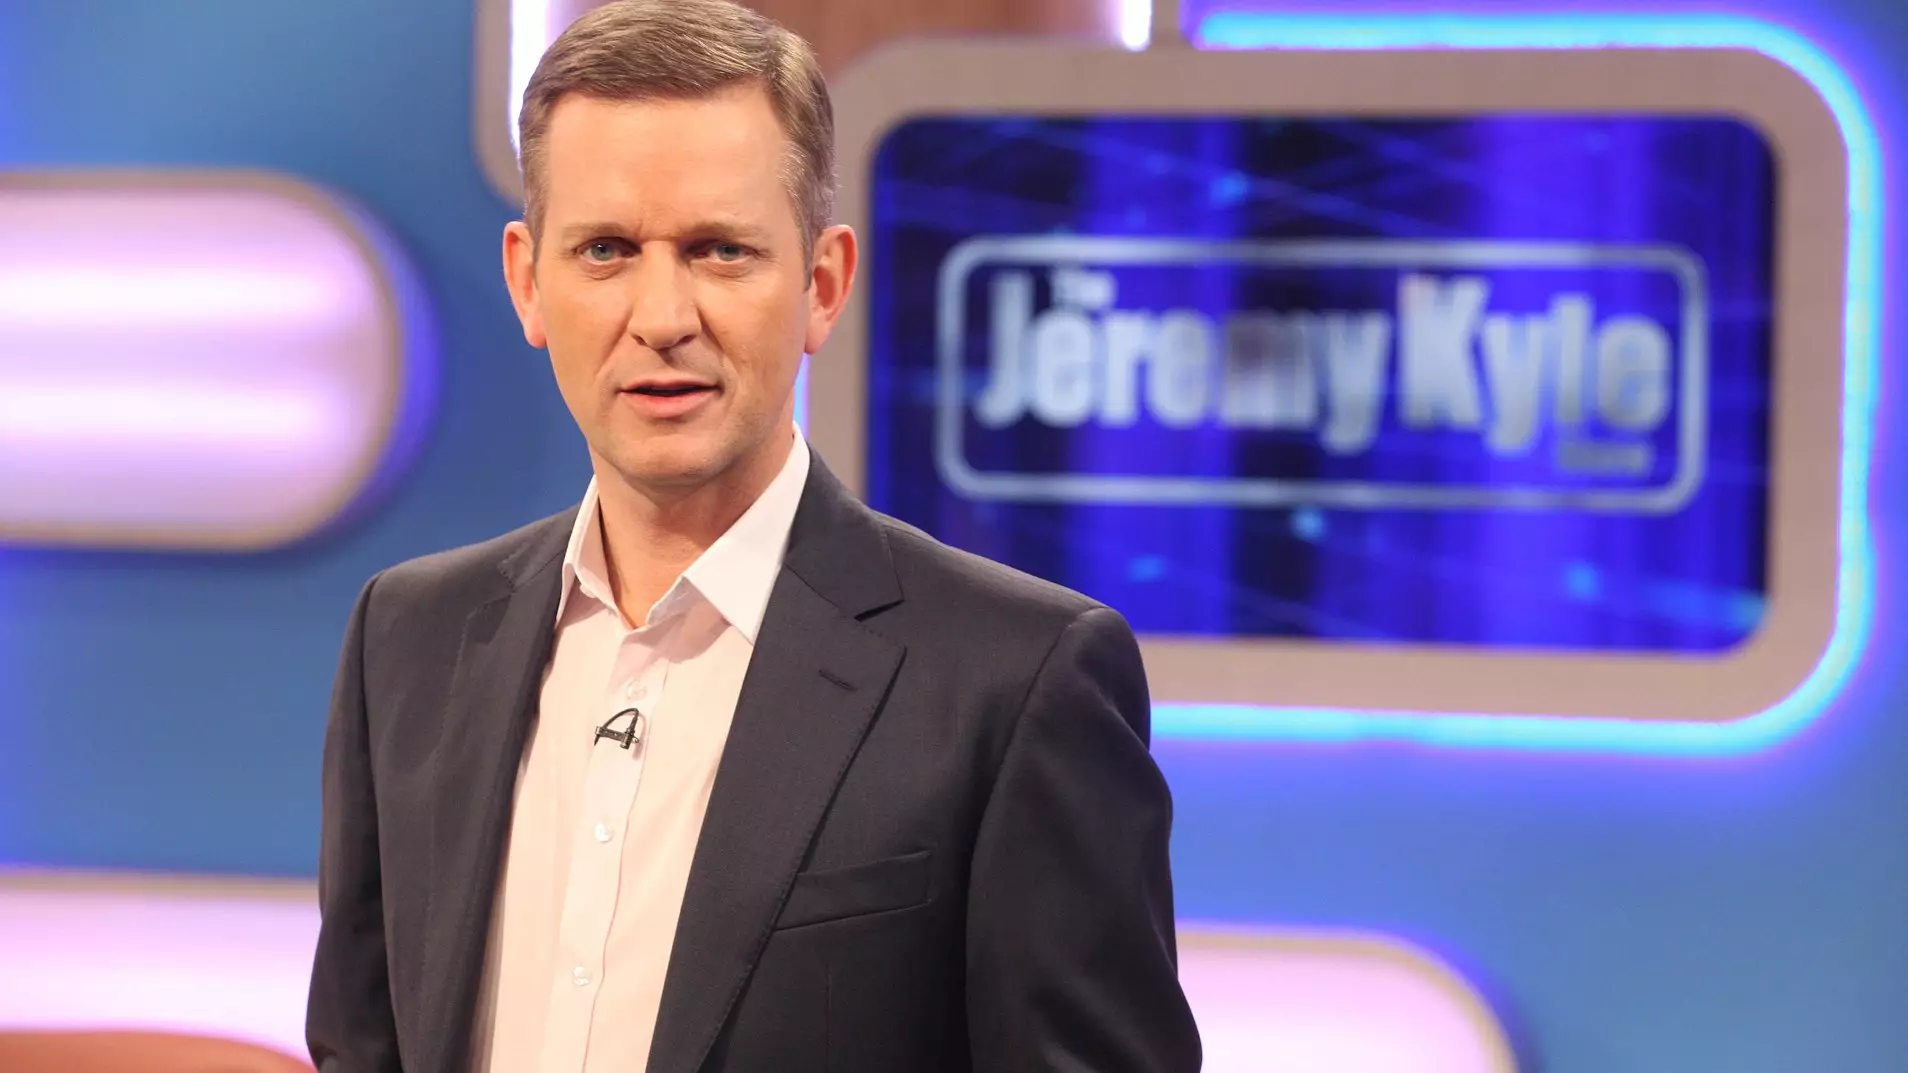 Jeremy Kyle Announces TV Comeback After Death Of Guest Saw His Show Axed